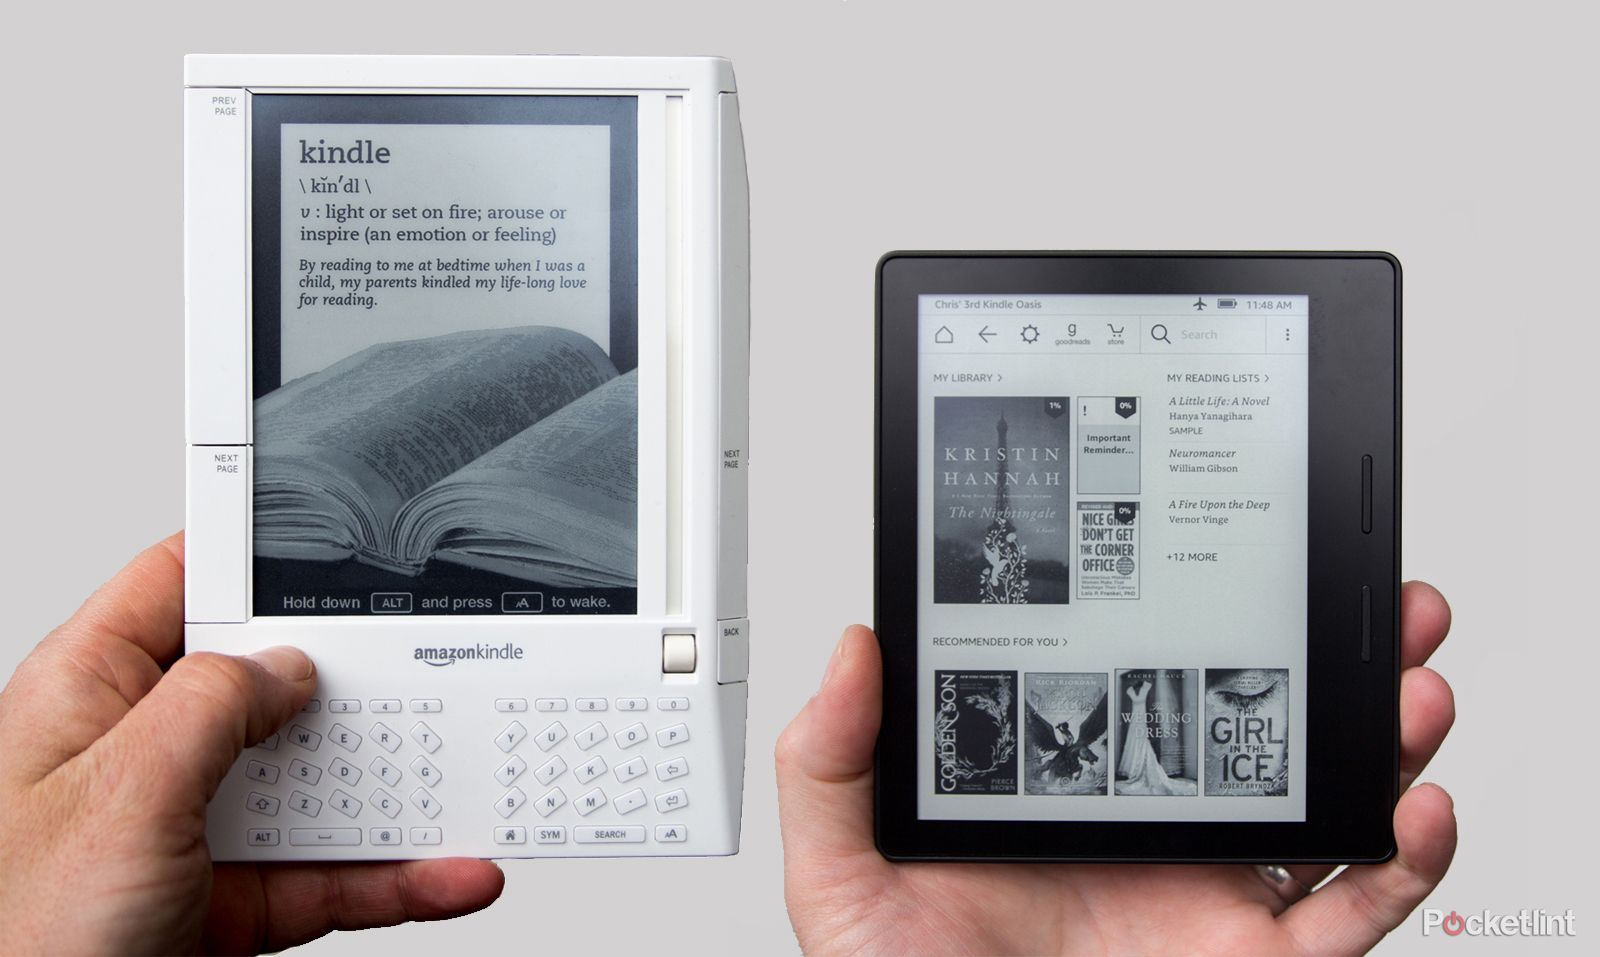 amazon kindle a brief history from the original kindle onwards image 1